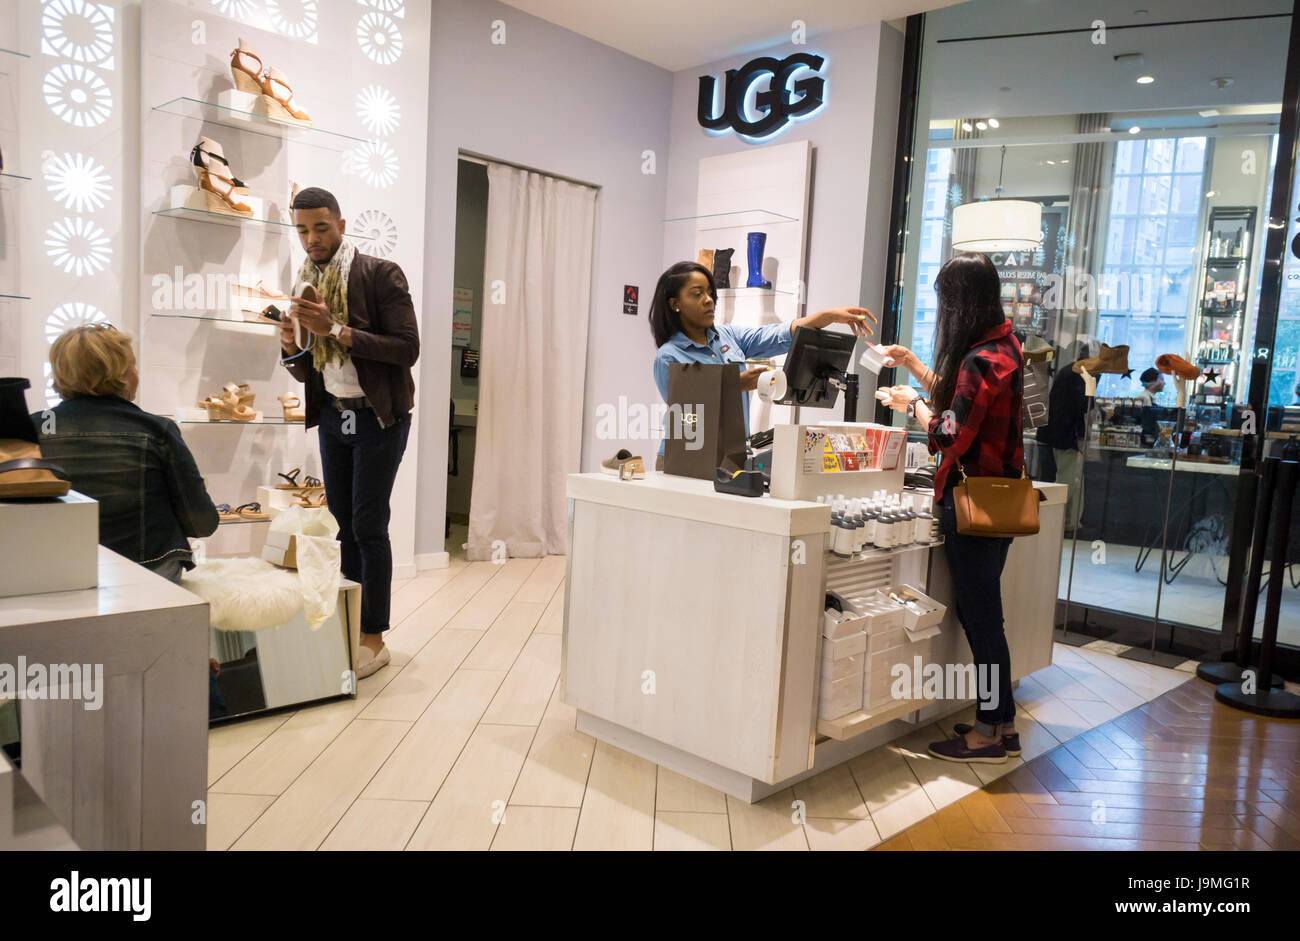 ugg outlet tulalip